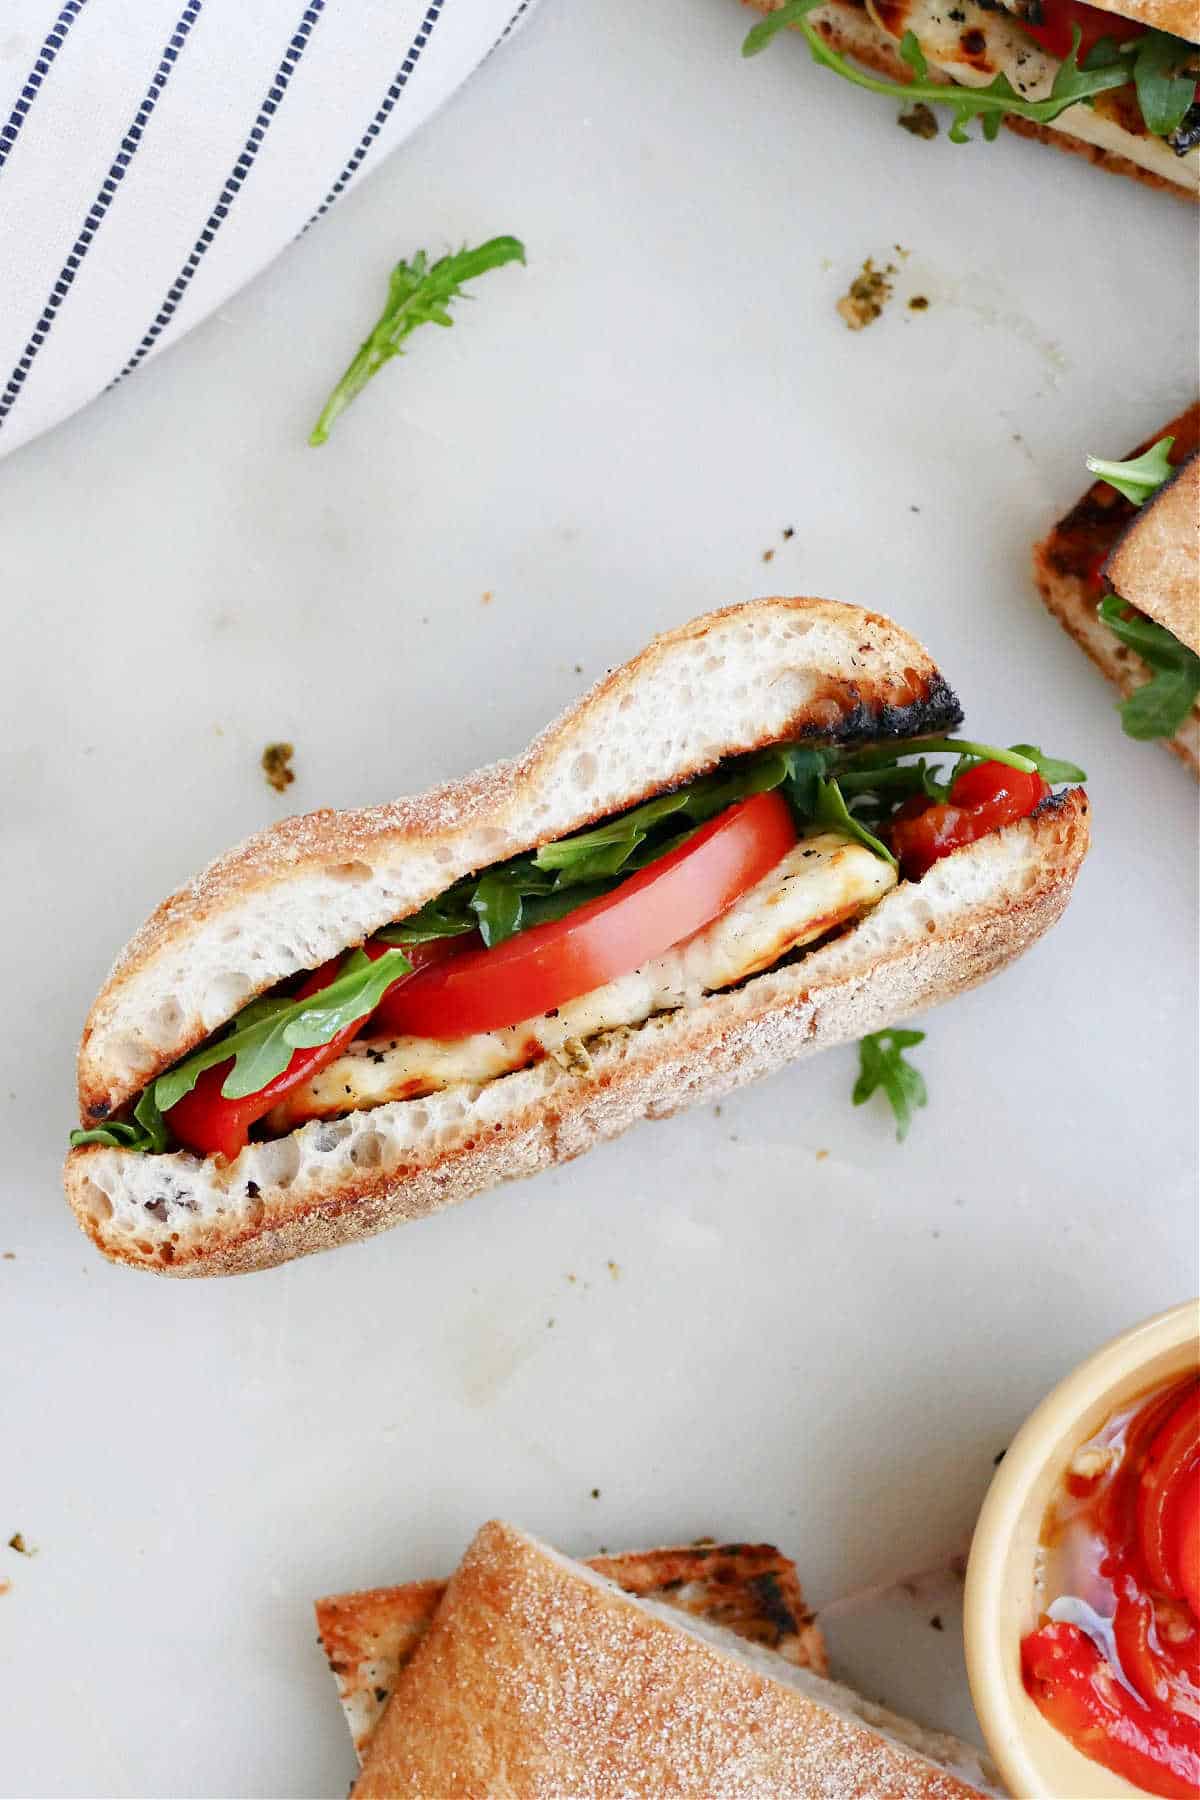 halloumi sandwich with tomato and veggies on its side on a counter